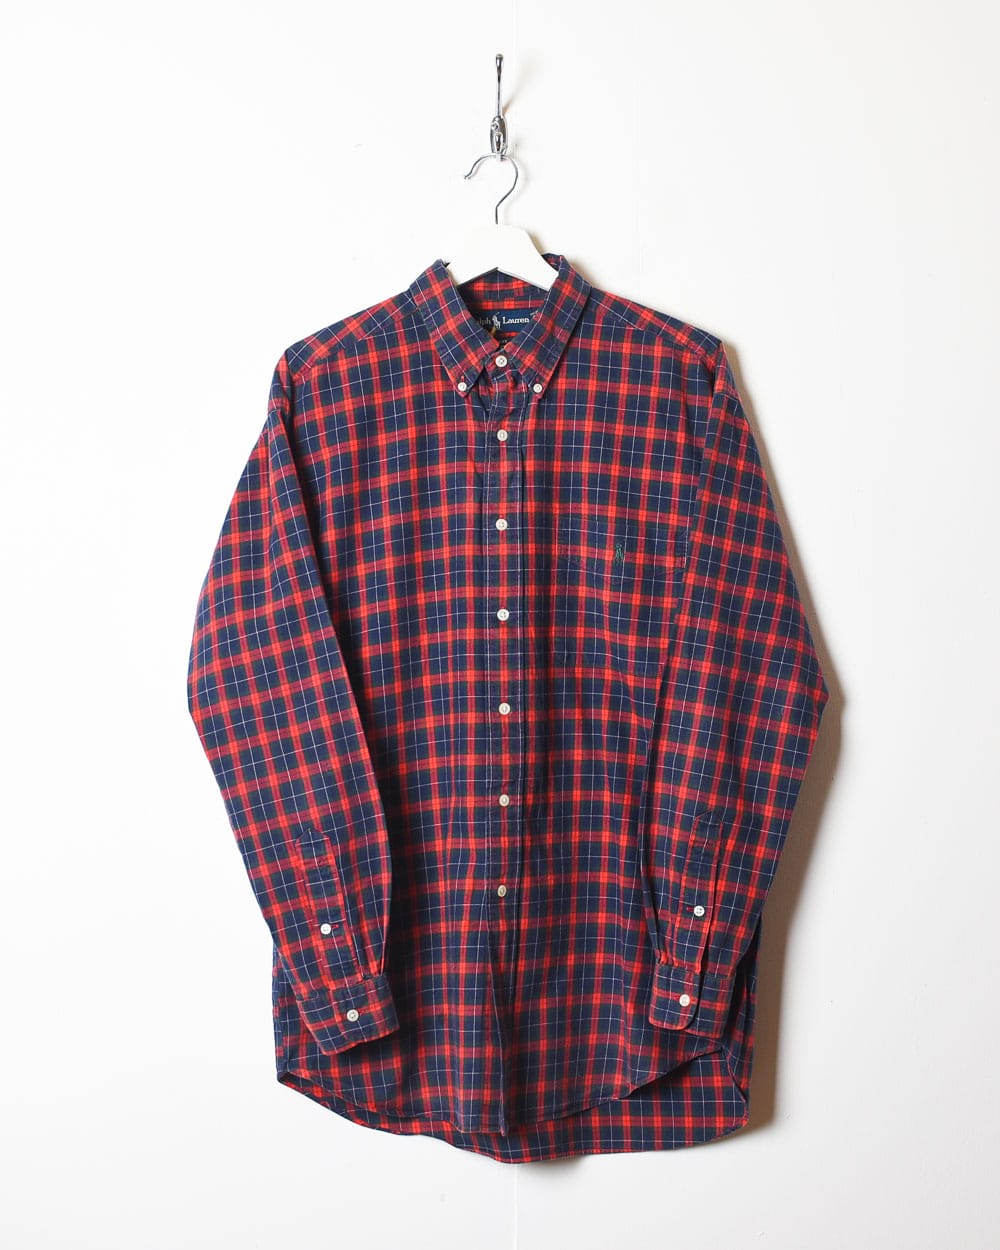 Vintage 90s Red Polo Ralph Lauren Checked Shirt - Large Cotton